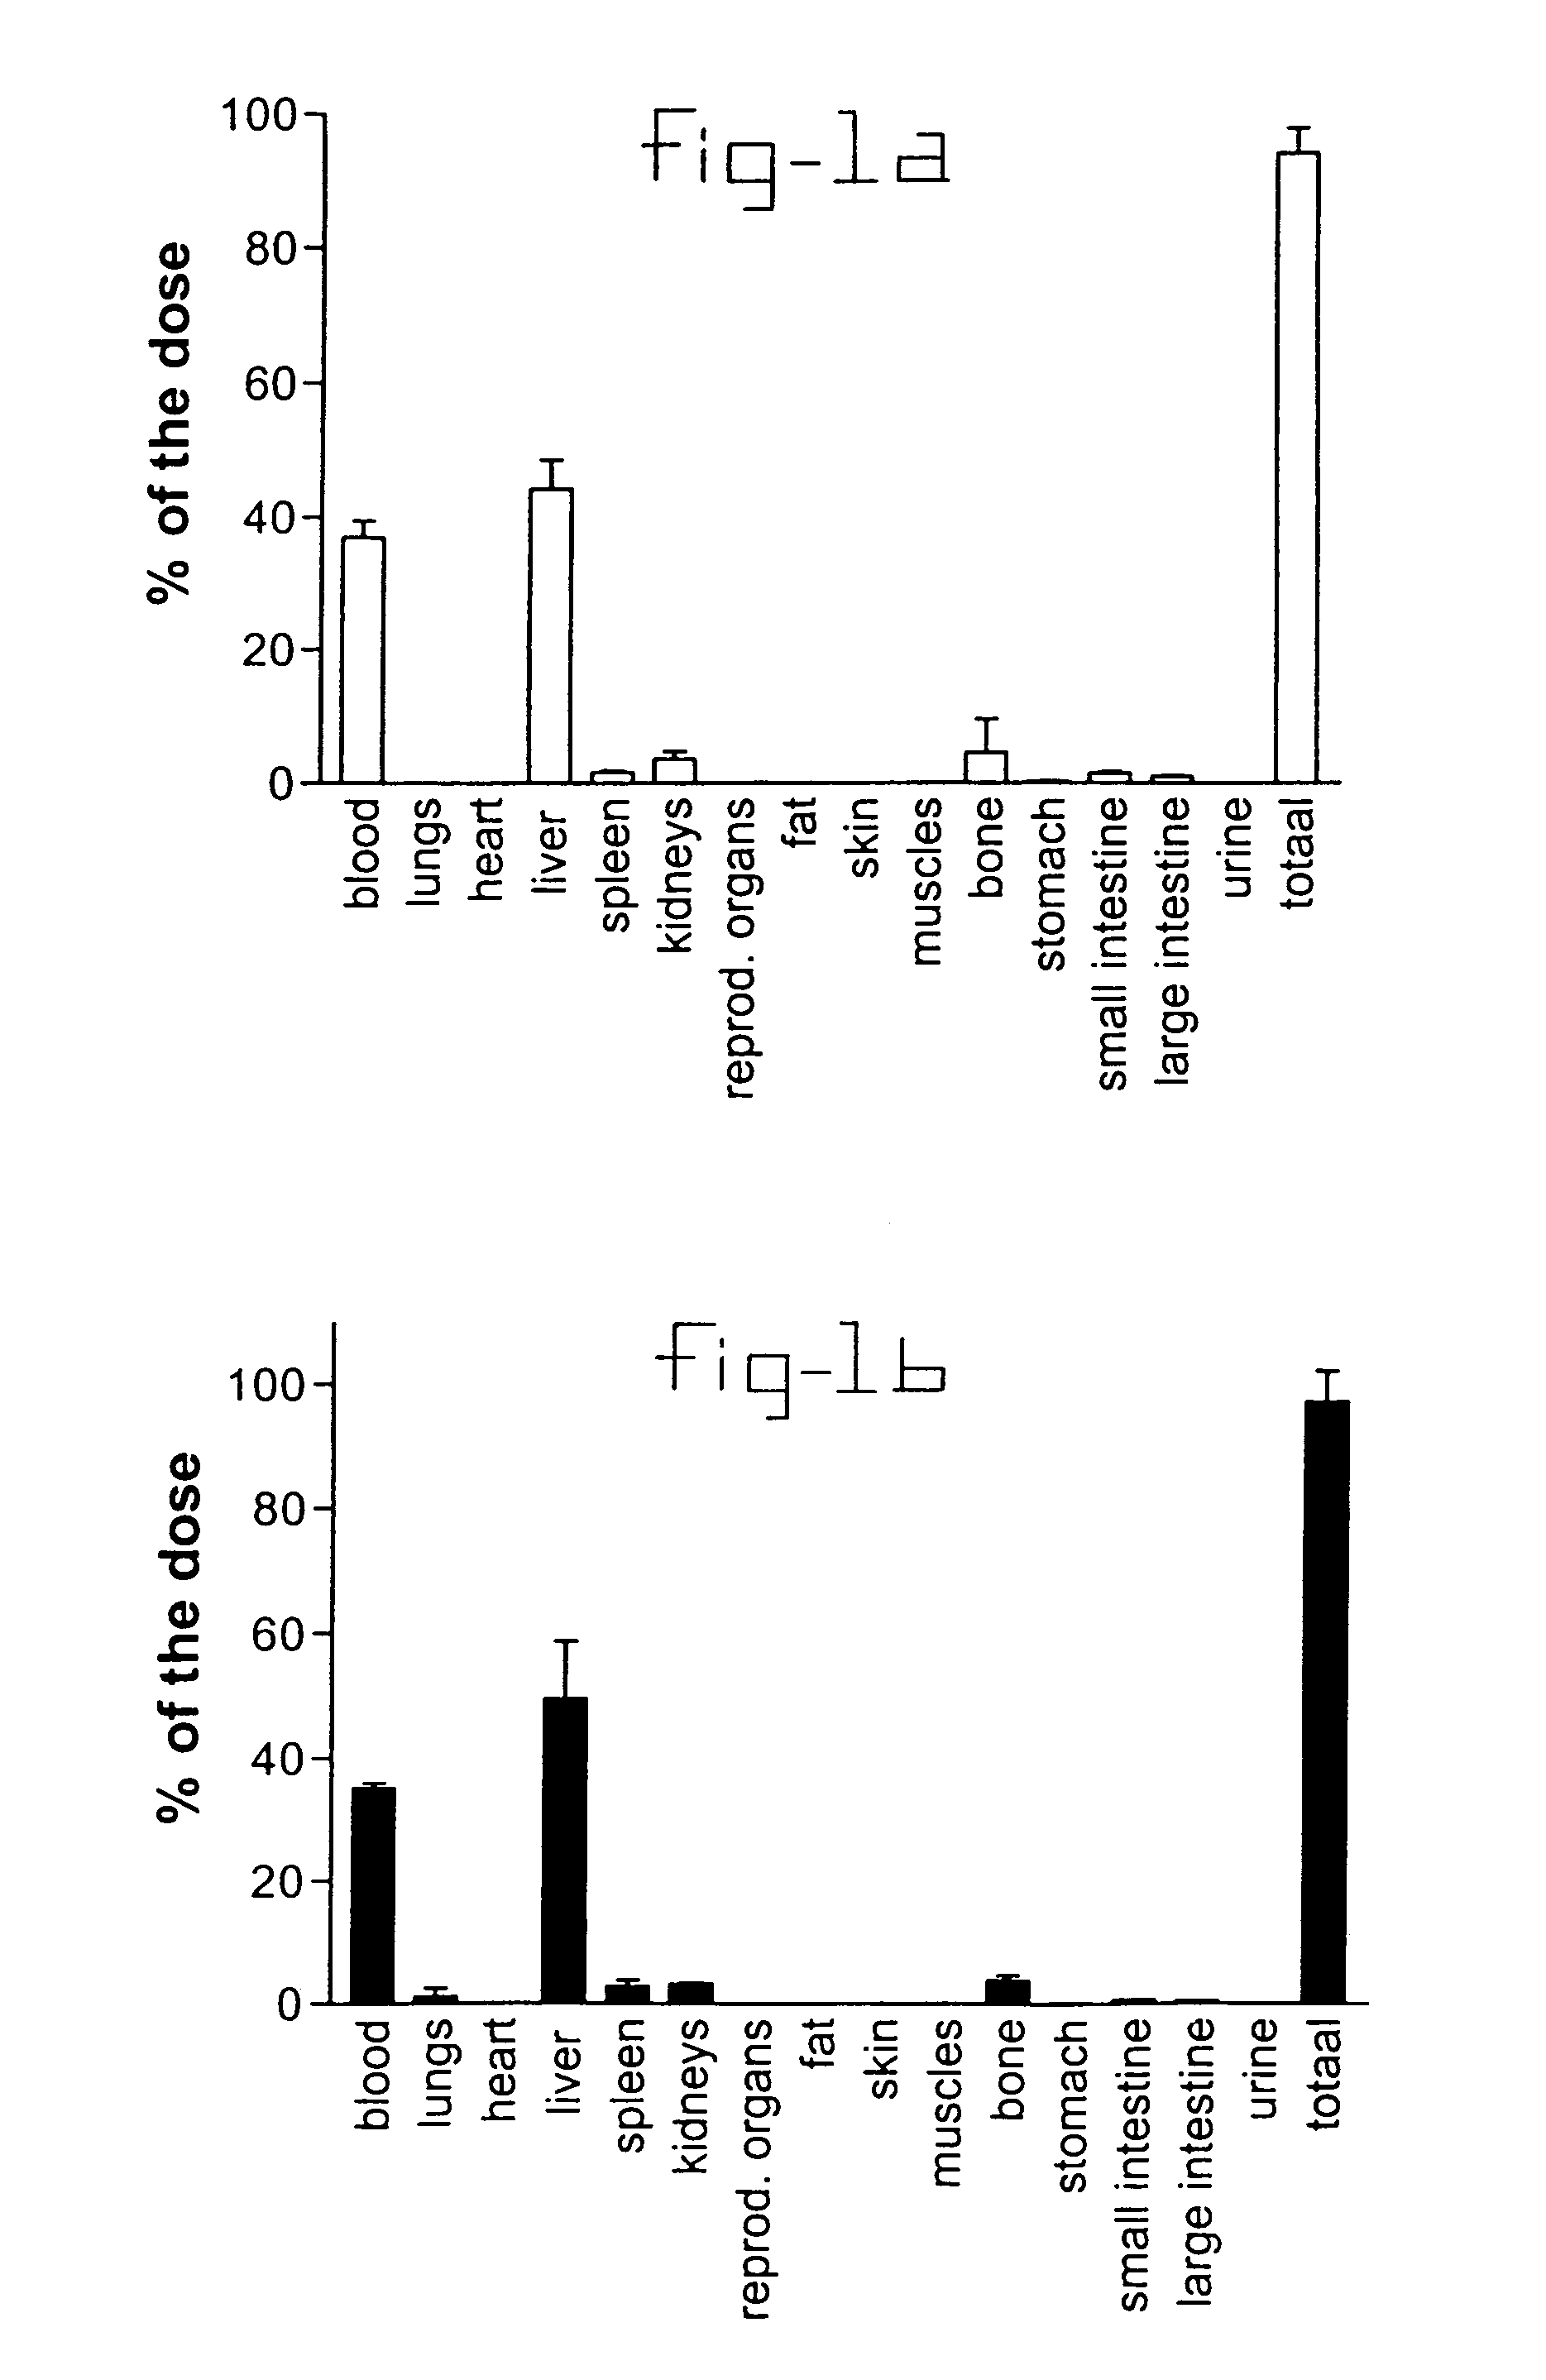 Method for targeting cells involved in sclerotic and/or fibrotic diseases